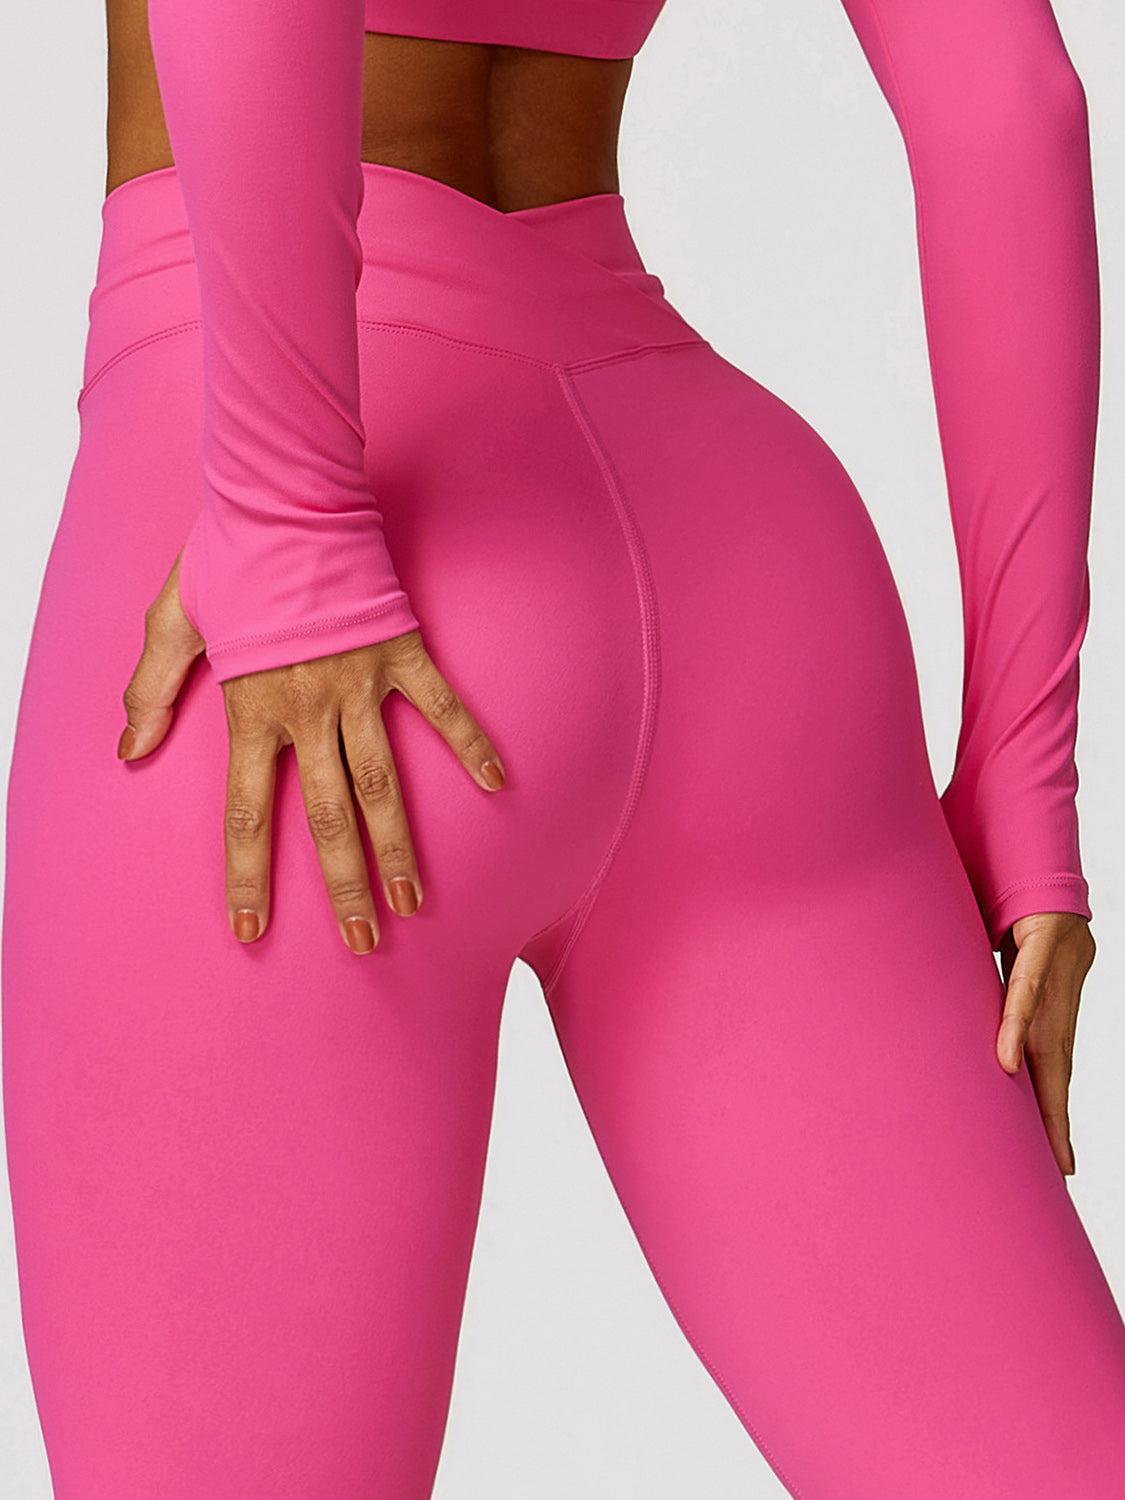 a woman in a pink sports suit with her hands on her hips